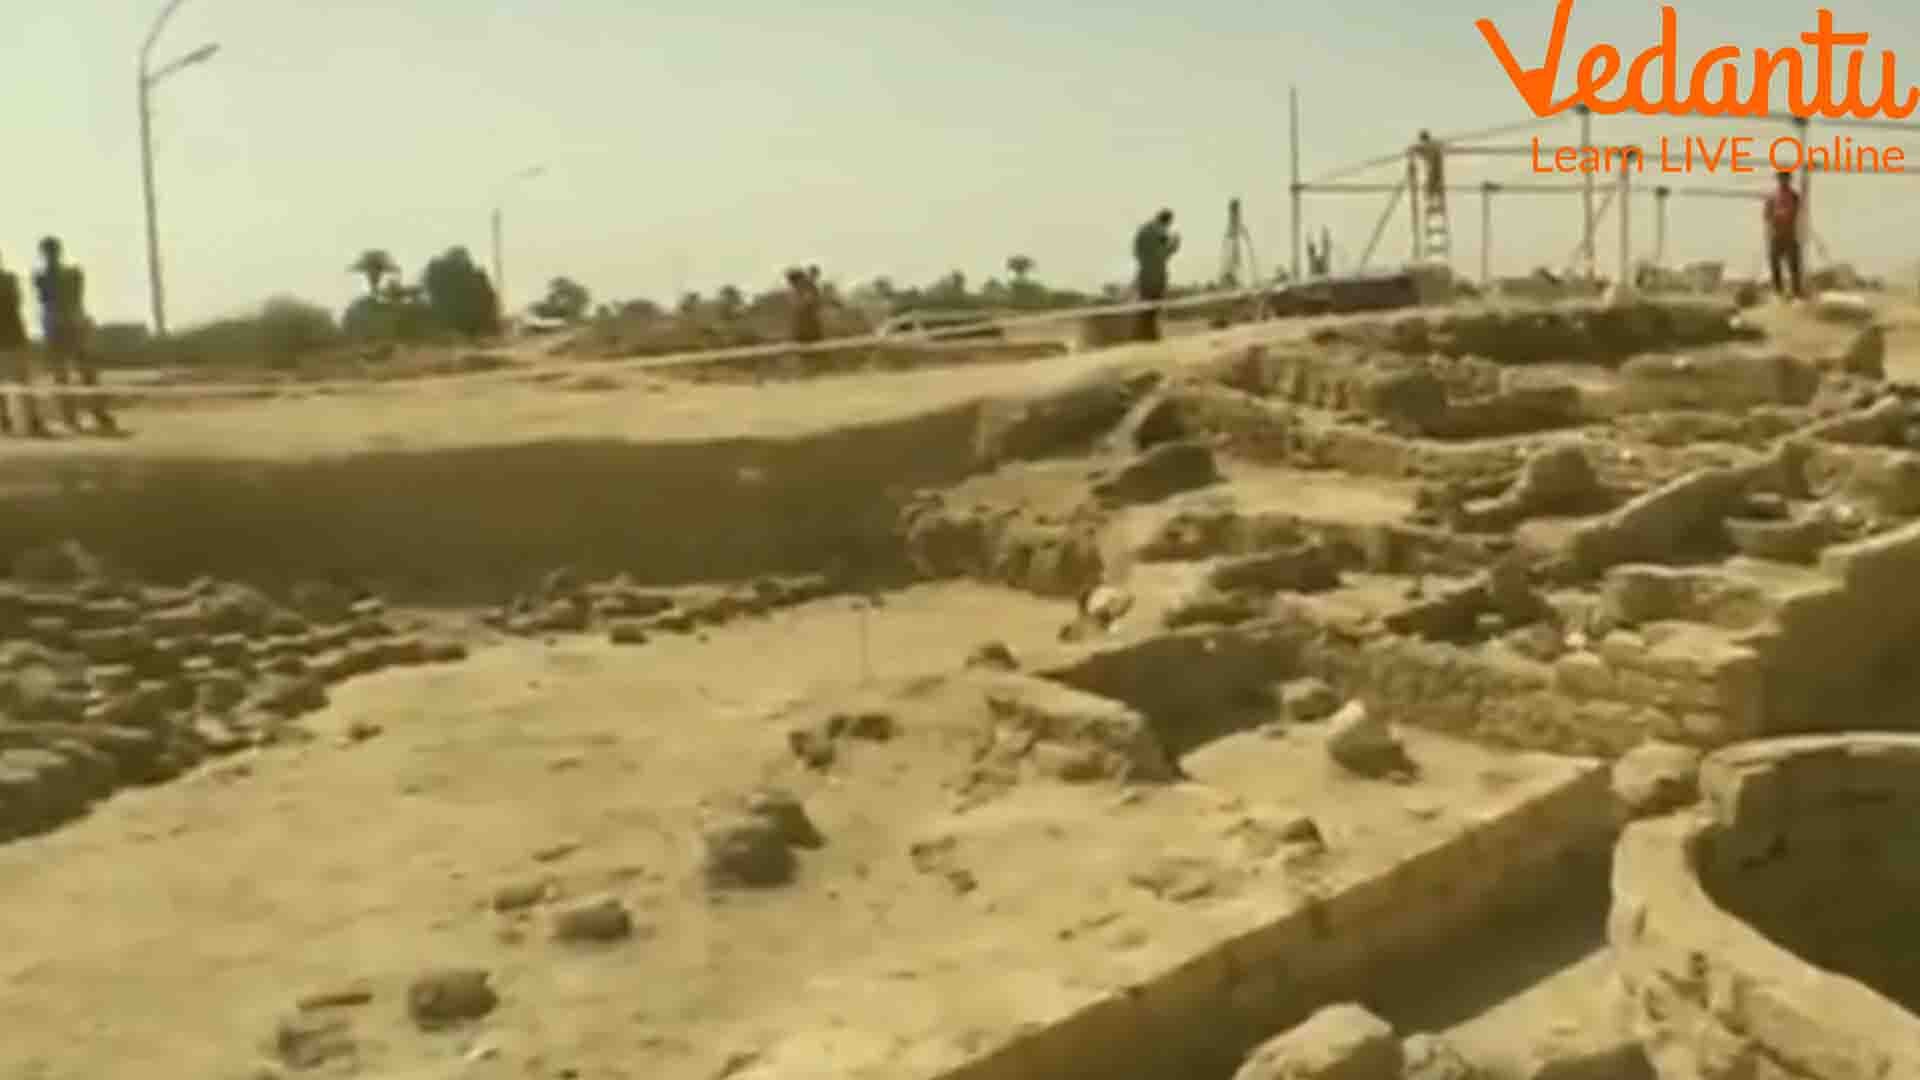 3000-Year-Old Lost City Unearthed in Egypt